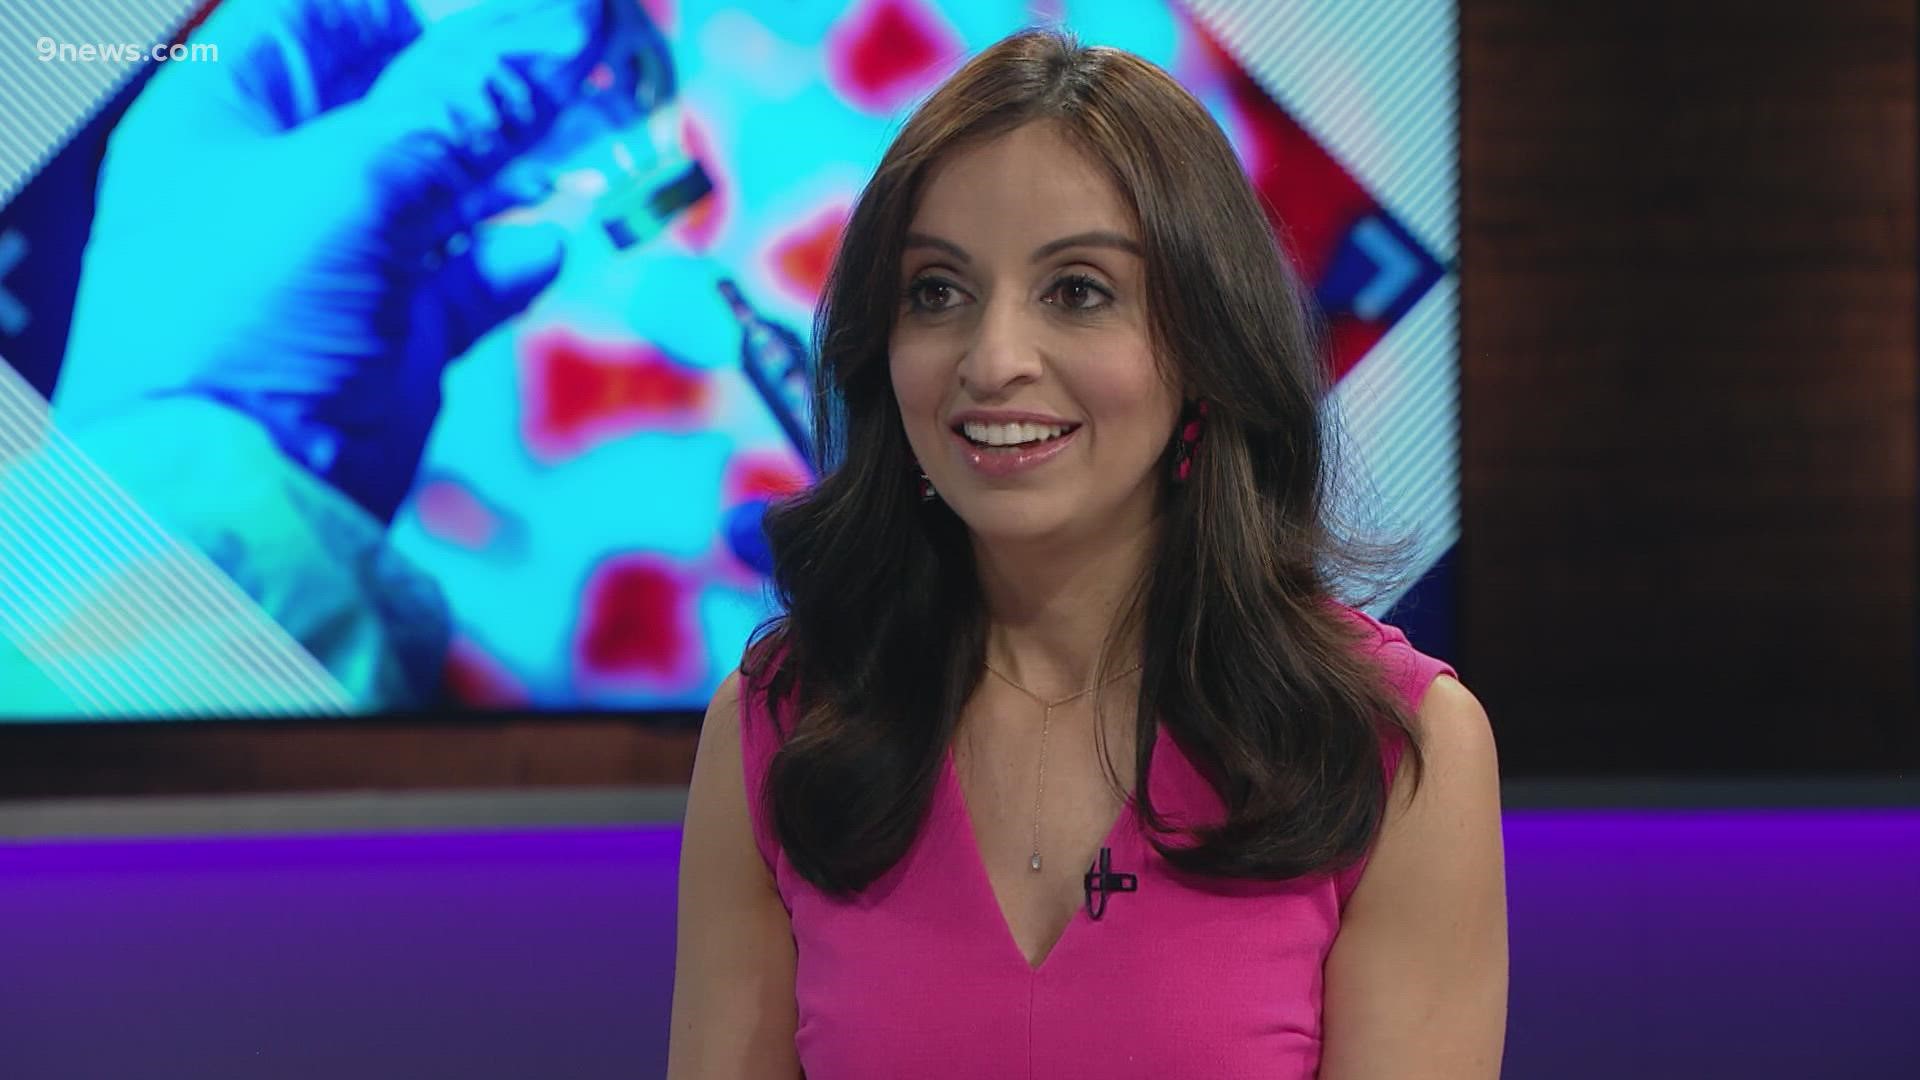 9NEWS health expert, Dr. Payal Kohli, weighs in on why you need to get vaccinated even if you've already had COVID-19.